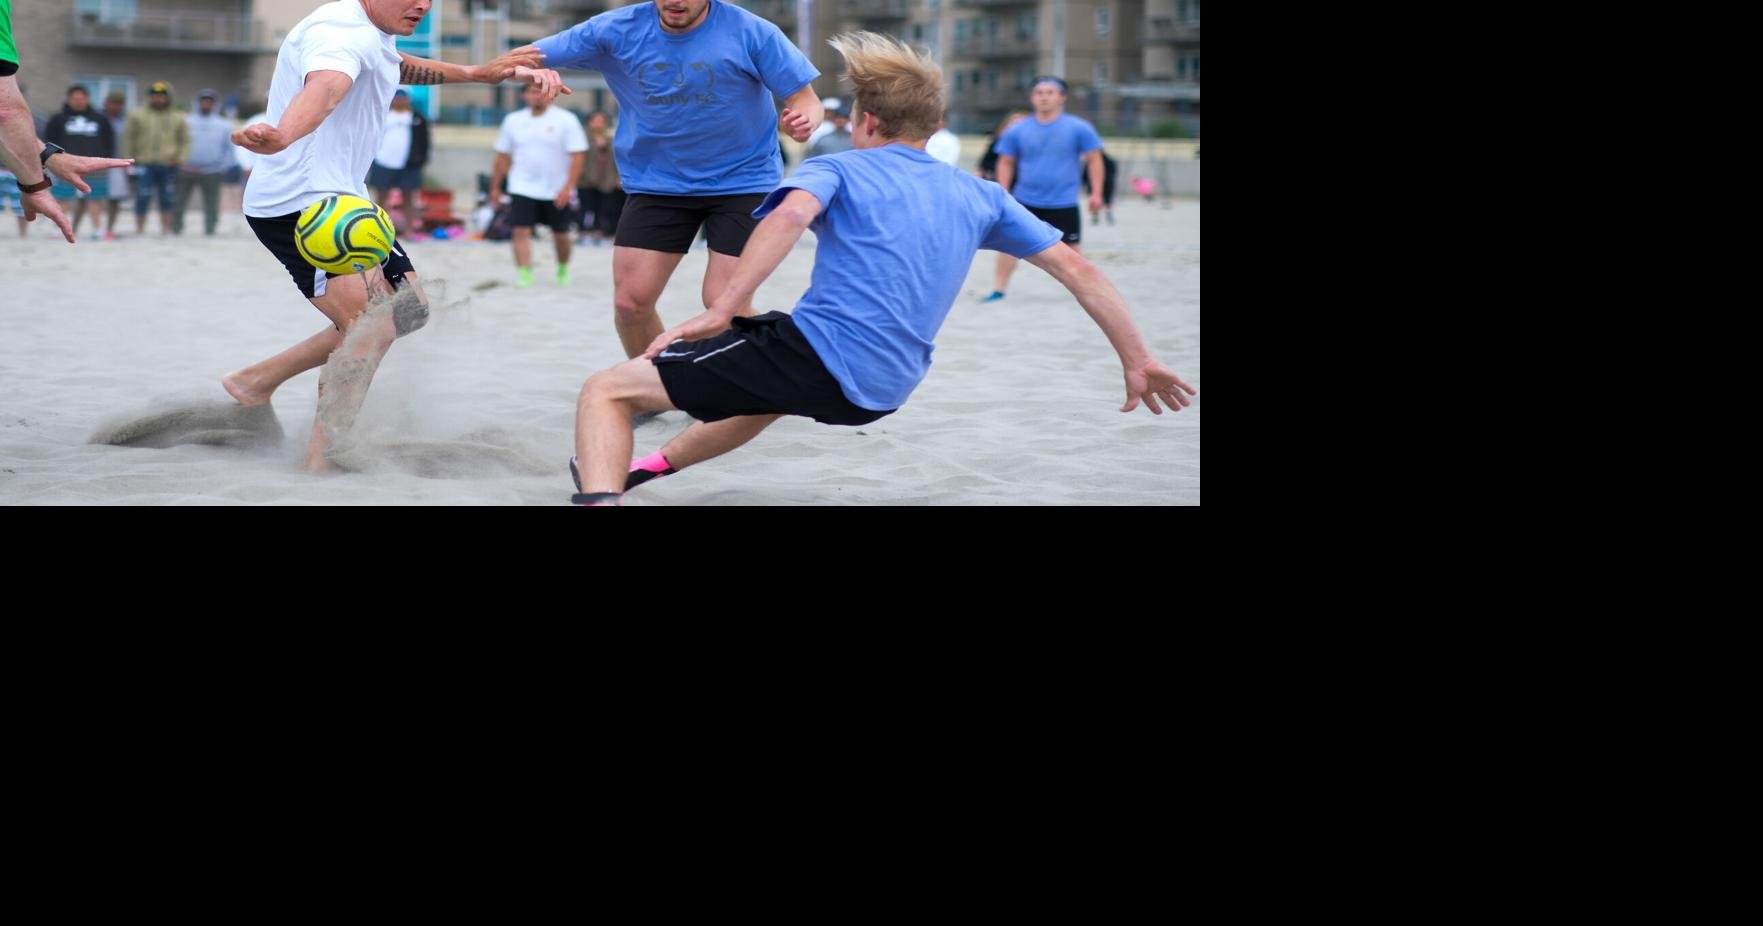 Annual beach soccer tournament comes to Seaside Sports